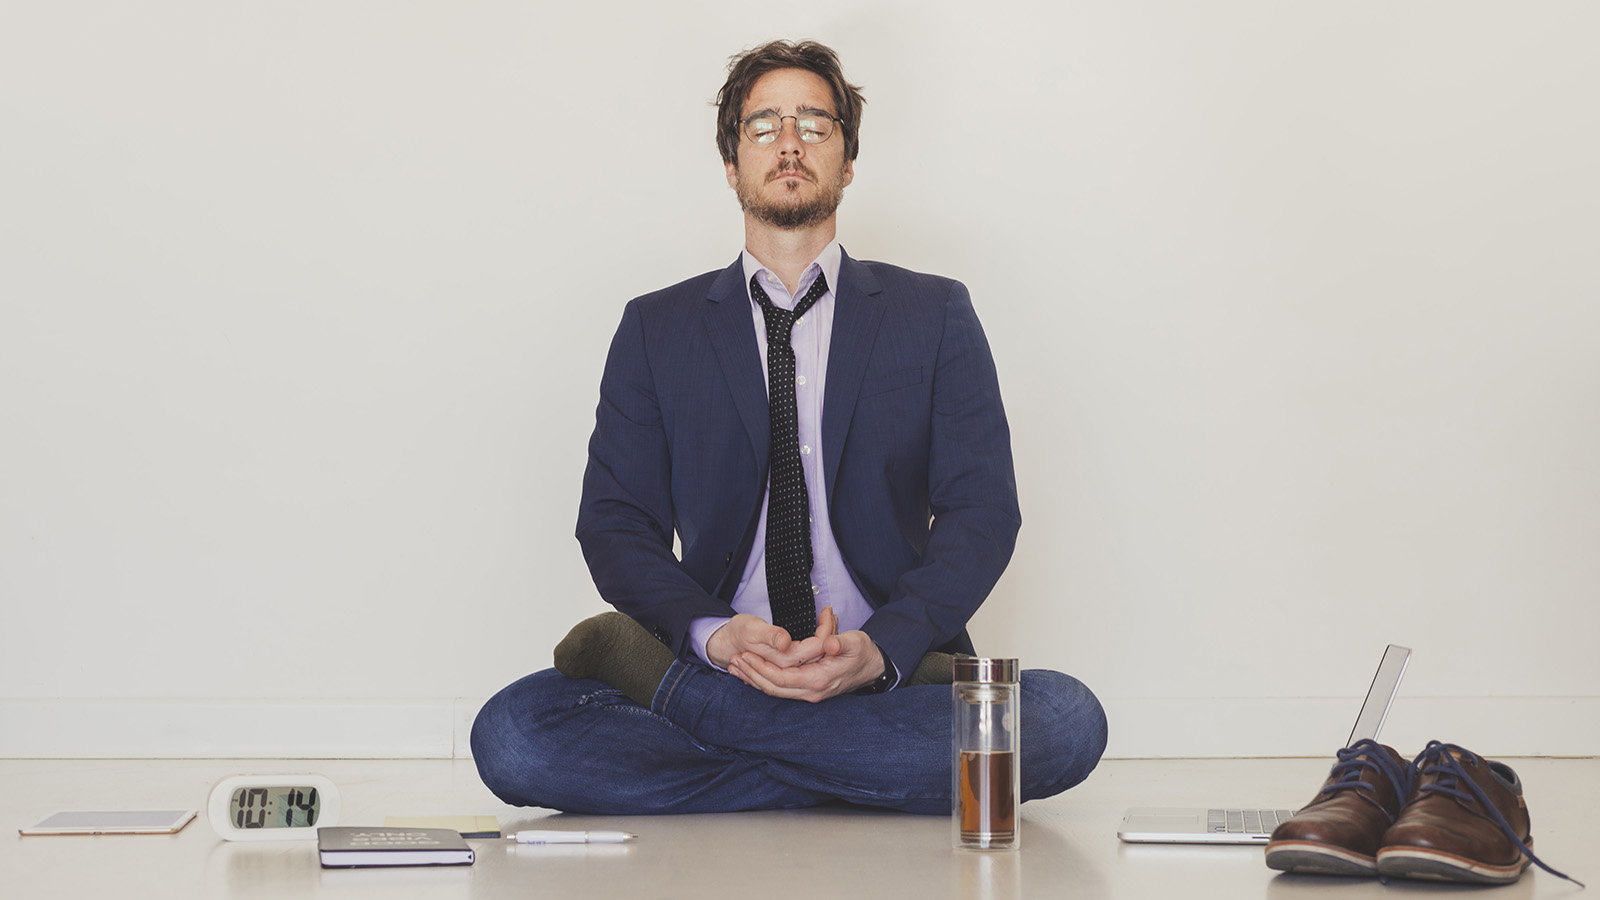 a man sitting cross-legged on the floor, benefiting from meditation after work